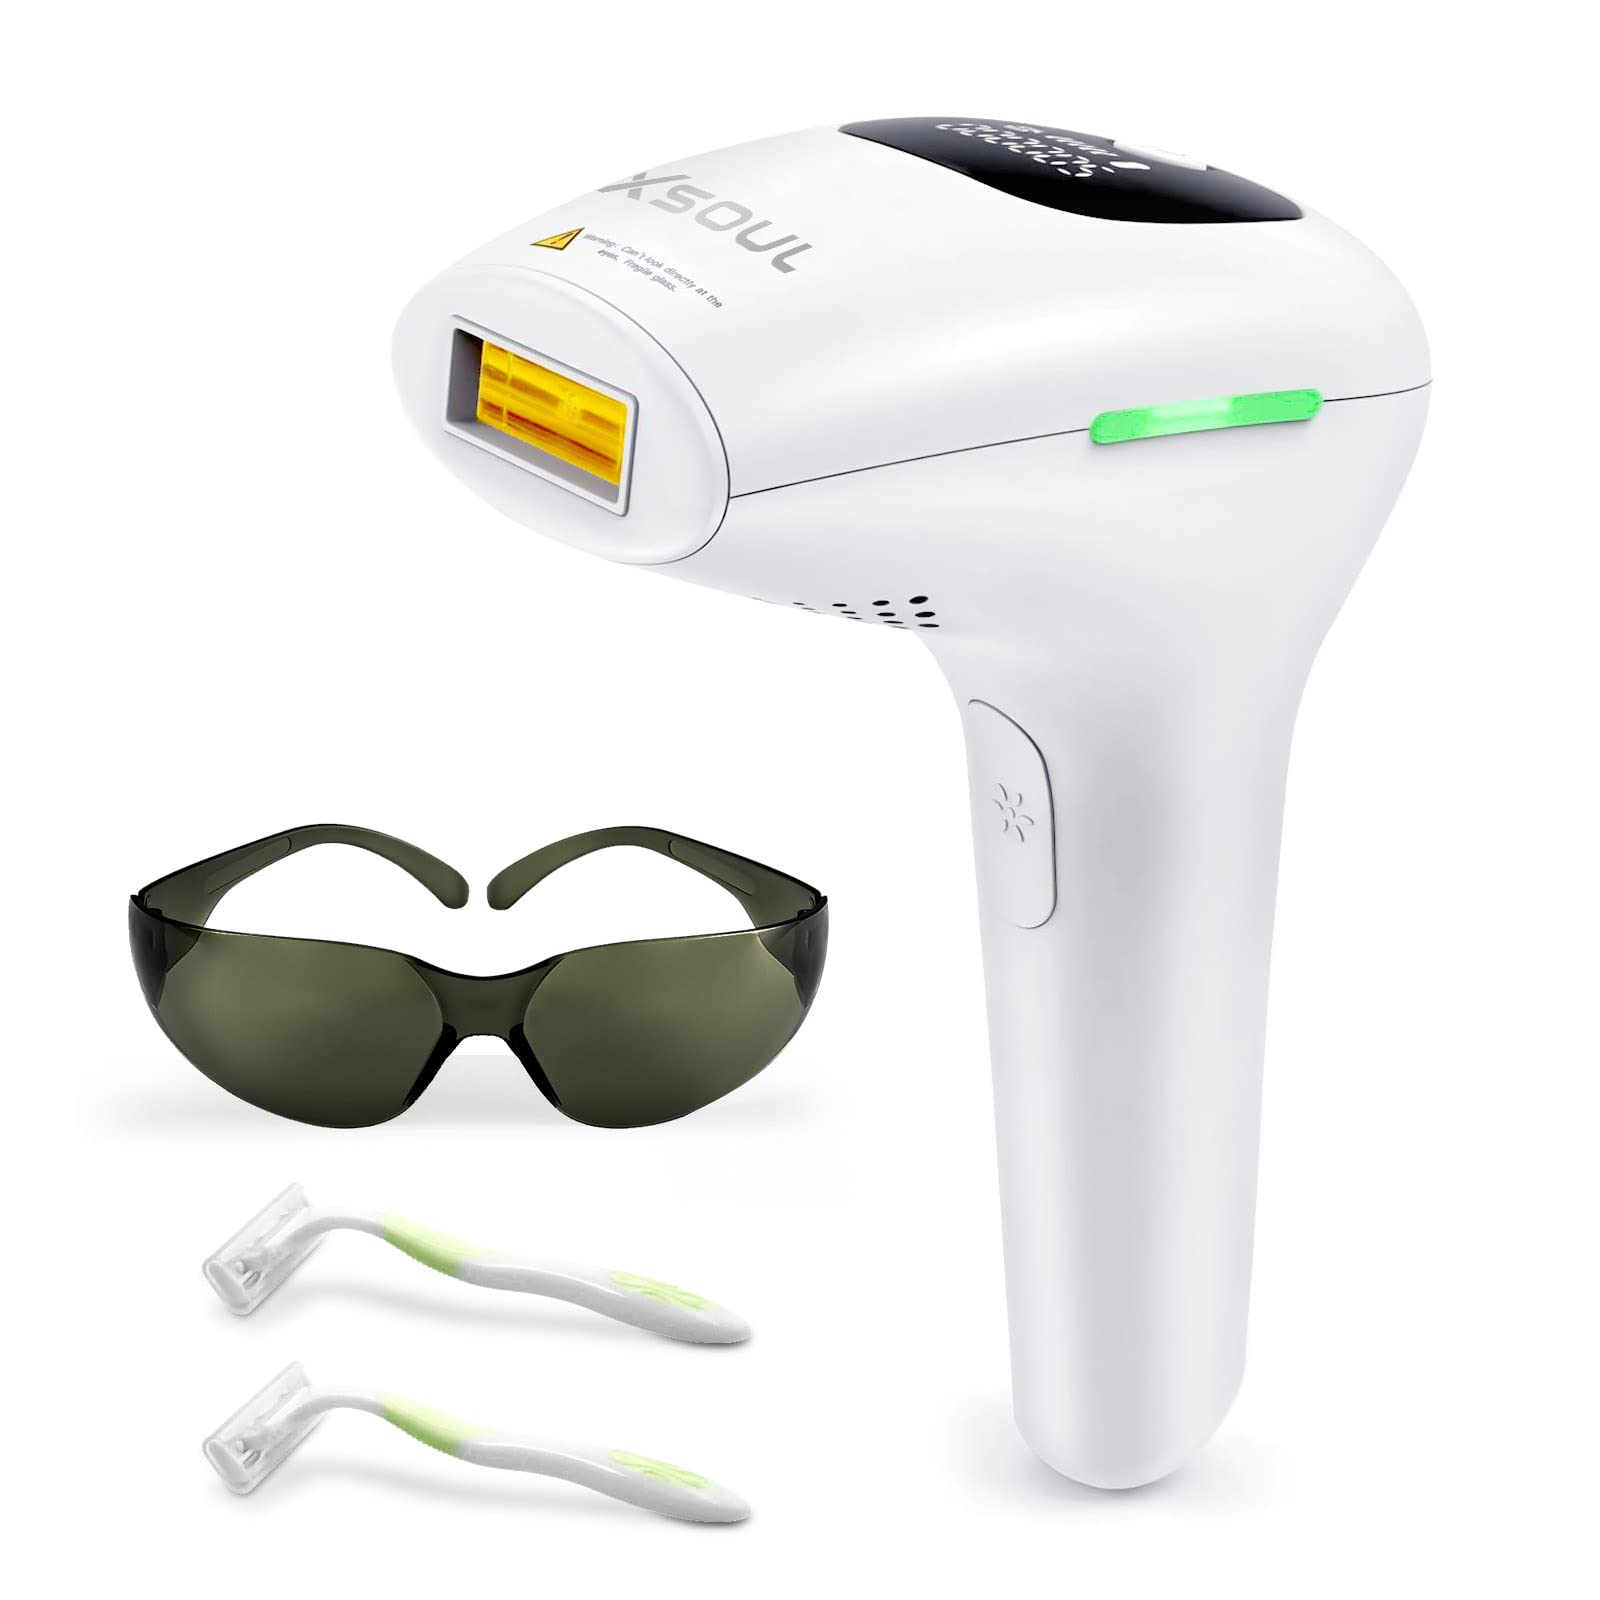 XSOUL At-Home IPL Hair Removal for Women and Men Permanent Hair Removal 999,999 Flashes Painless Hair Remover on Armpits Back Le